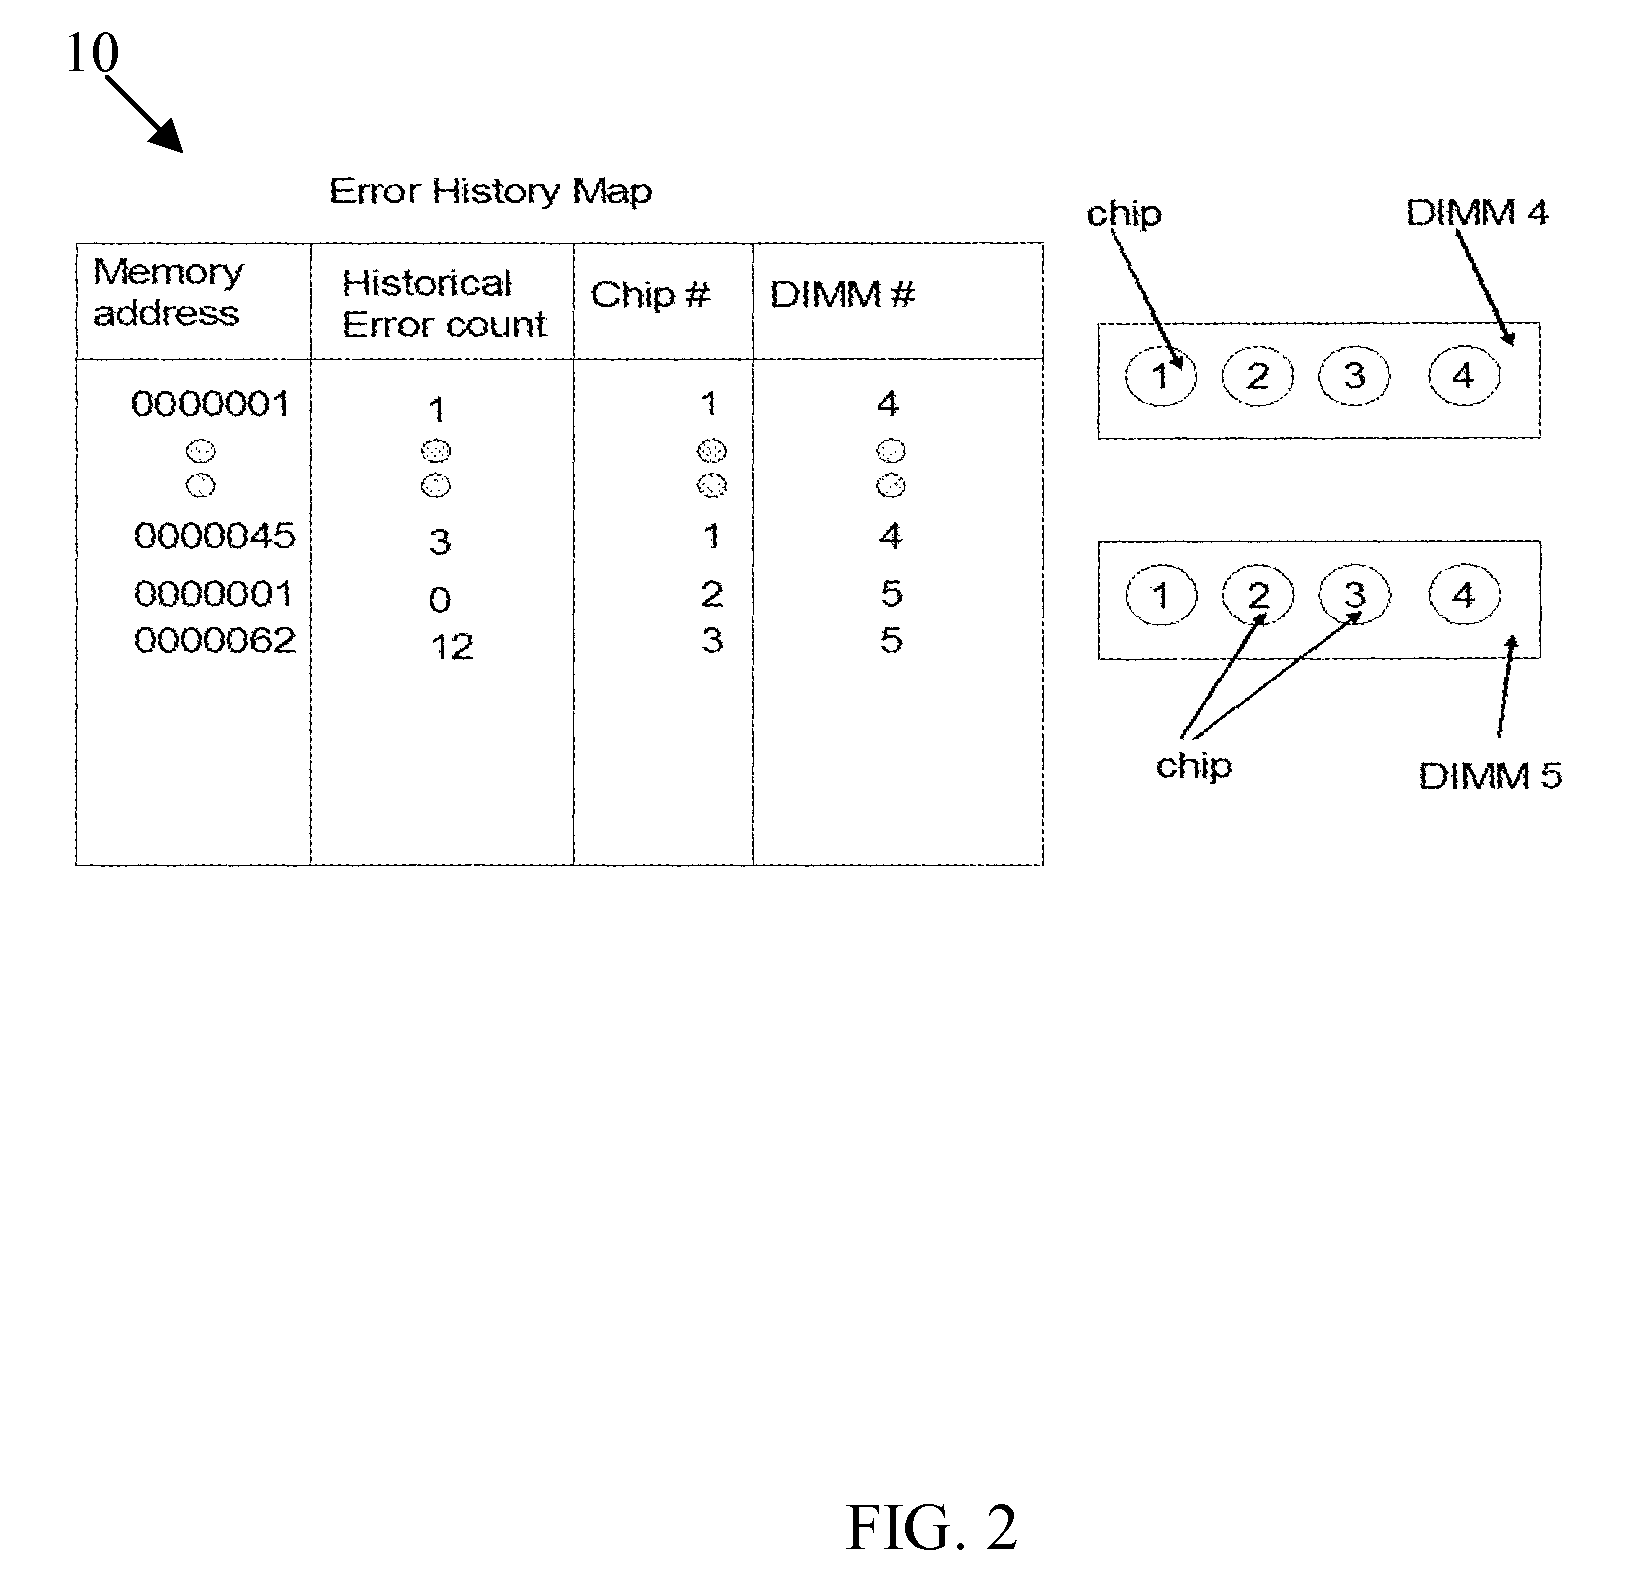 Method and system for enterprise memory management of memory modules